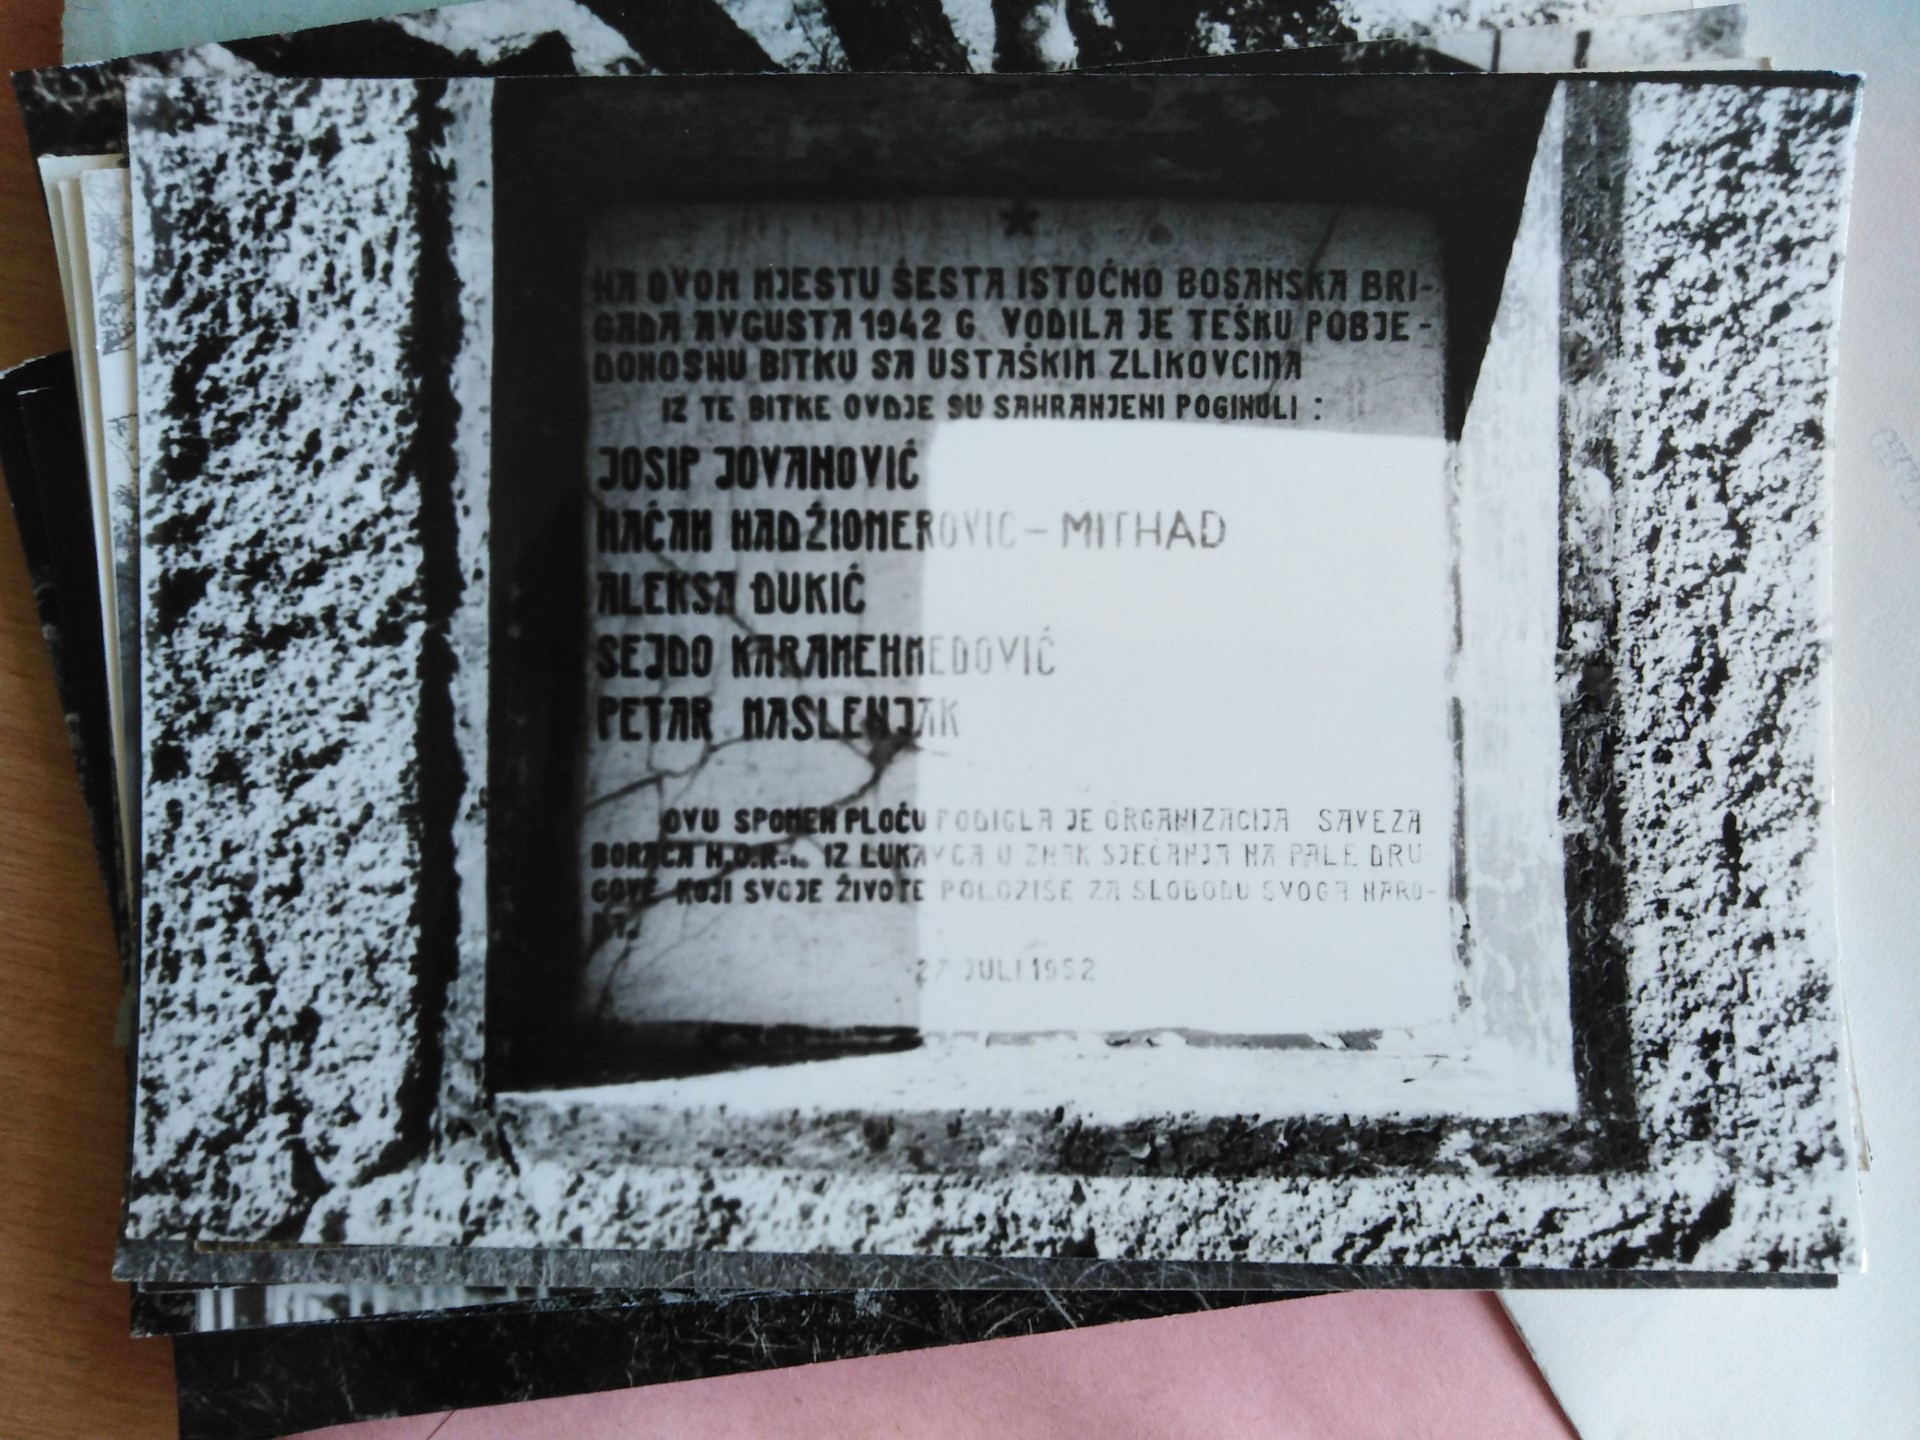  memorial plaque erected to fallen fighters at the place of death (source: spomenicinob.info)